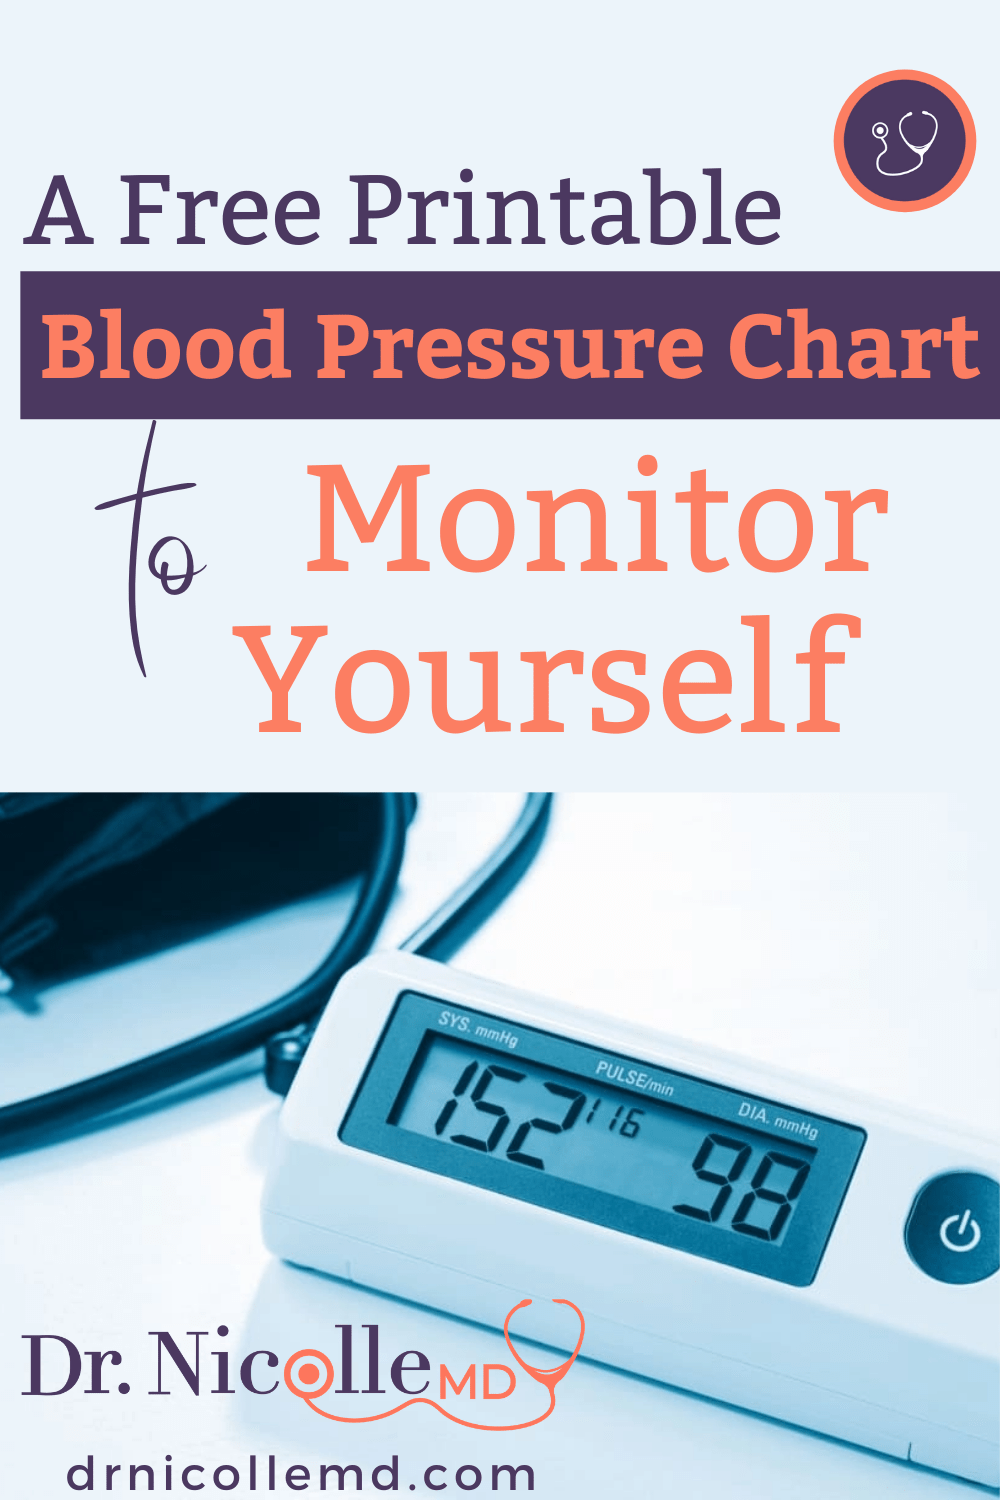 A Free Printable Blood Pressure Chart to Monitor Yourself